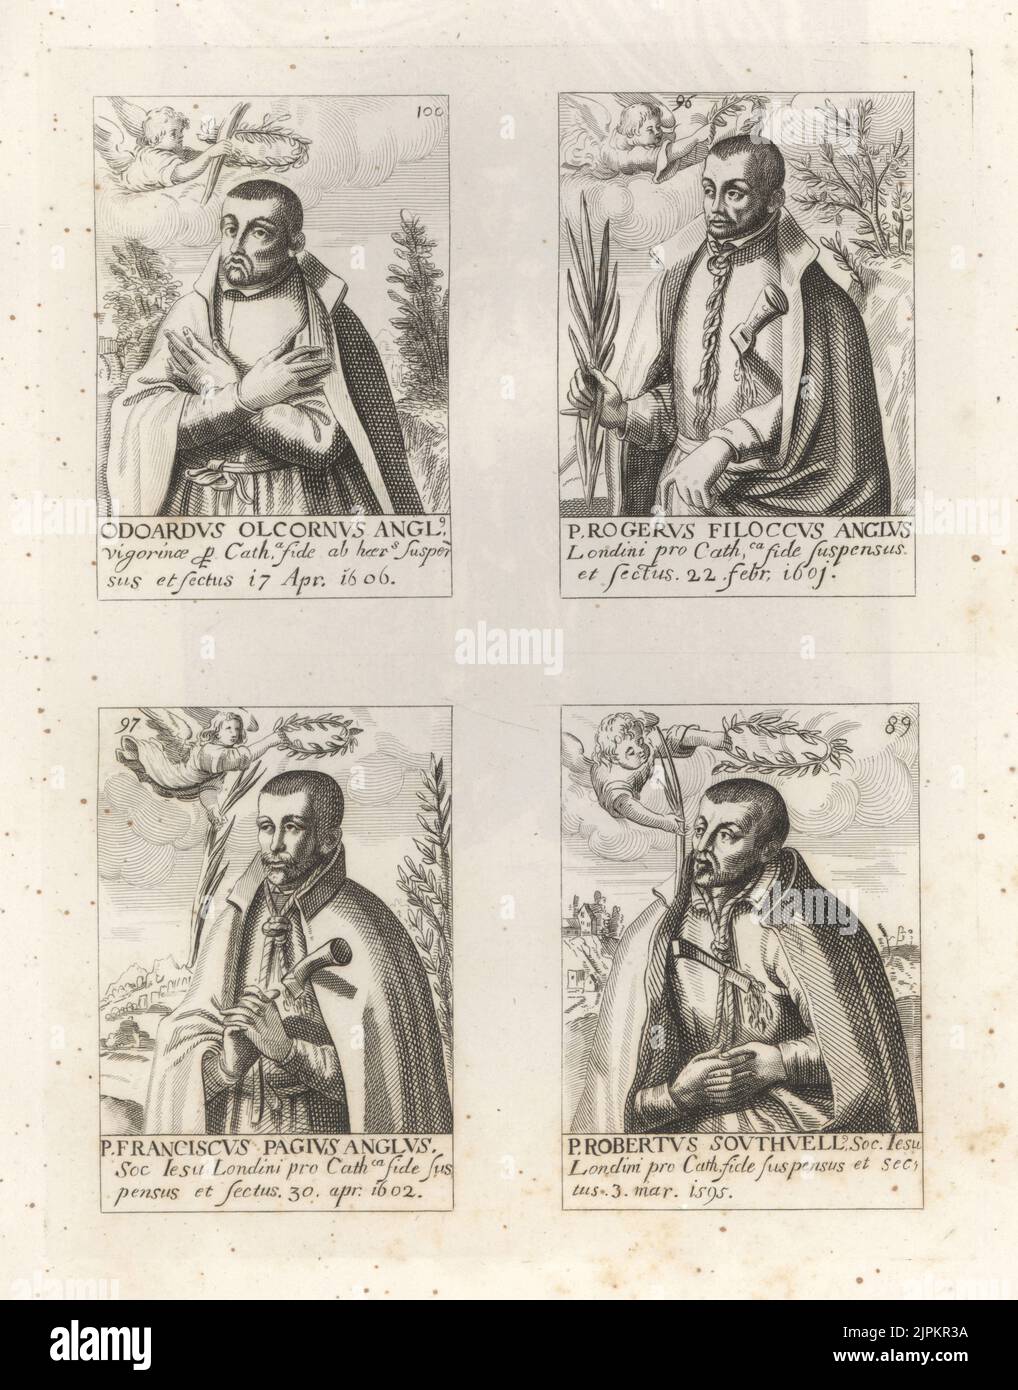 Portraits of Jesuit martyrs, English Catholics killed in the 17th century. Crowned with laurel wreaths by angels, several with hangman's noose and dagger, holding palm fronds. Edward Oldcorne 1606, Roger Filcock 1601, Franciscus Pagius 1602, and Robert Southwell 1595. Copperplate engraving from Samuel Woodburn’s Gallery of Rare Portraits Consisting of Original Plates, George Jones, 102 St Martin’s Lane, London, 1816. Stock Photo